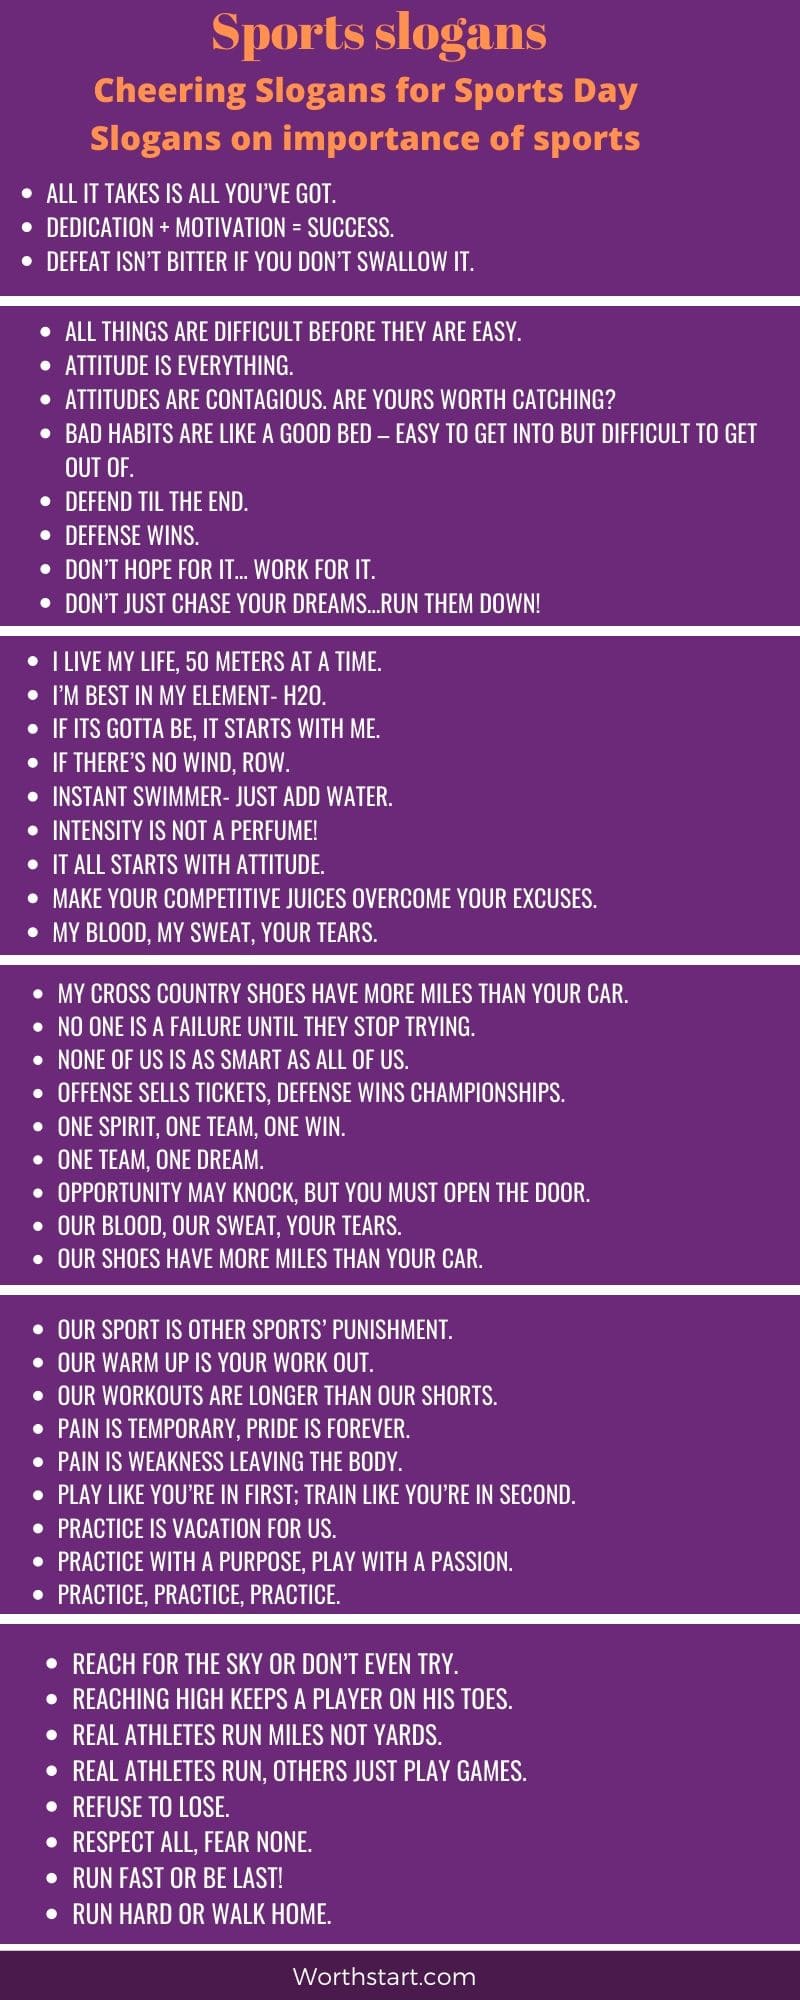 Sports Slogans: 200+ Slogans on the Importance of Sports